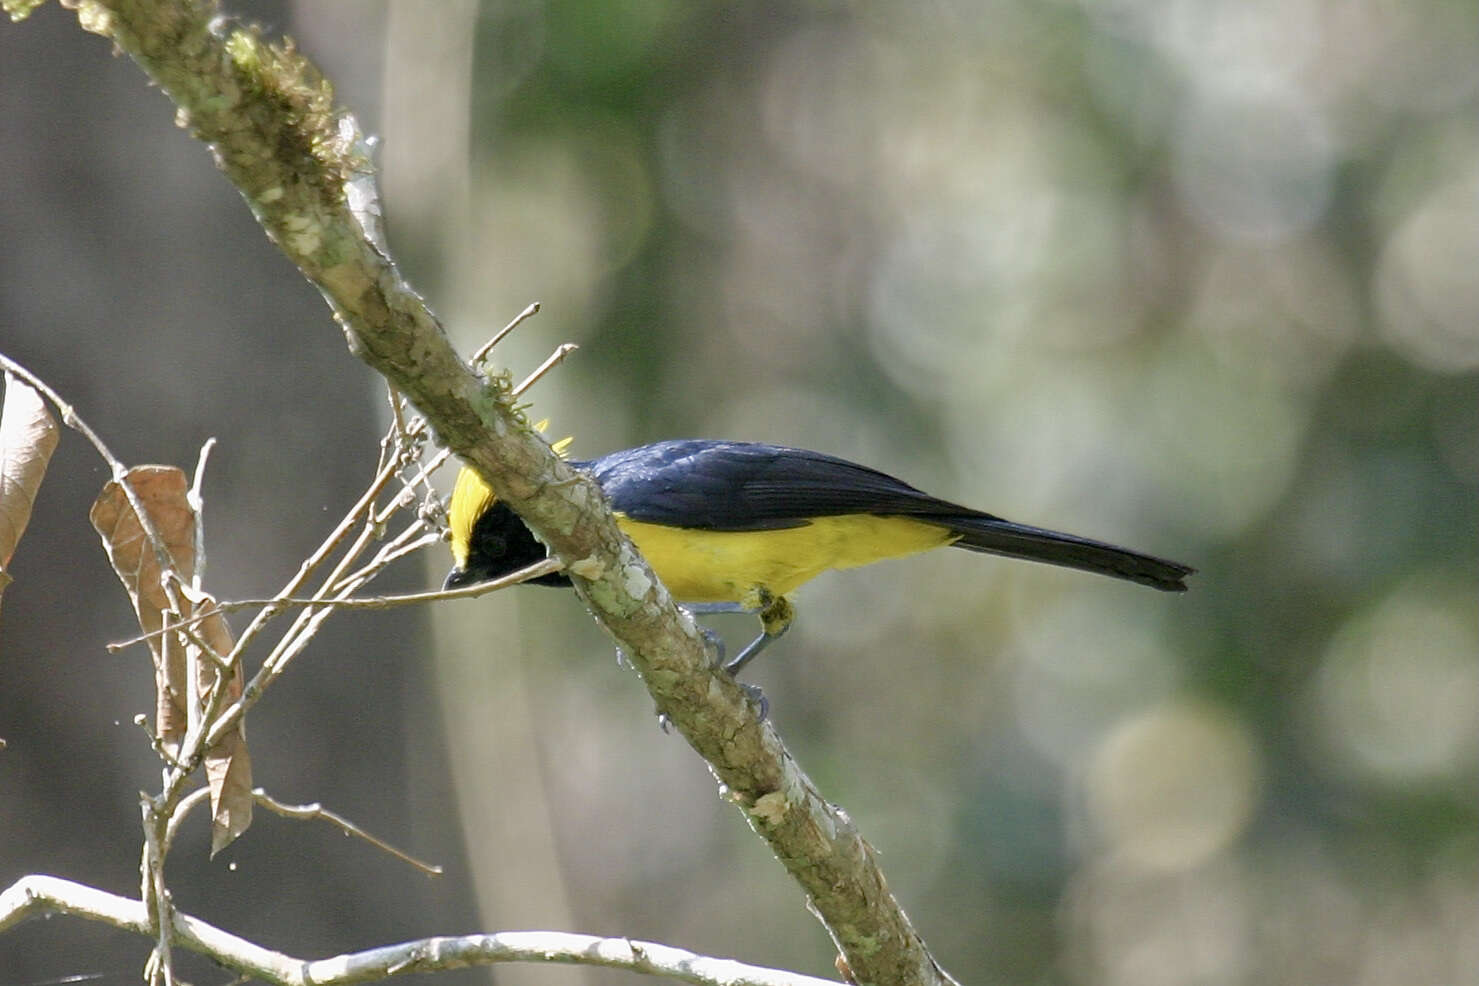 Image of Sultan Tit